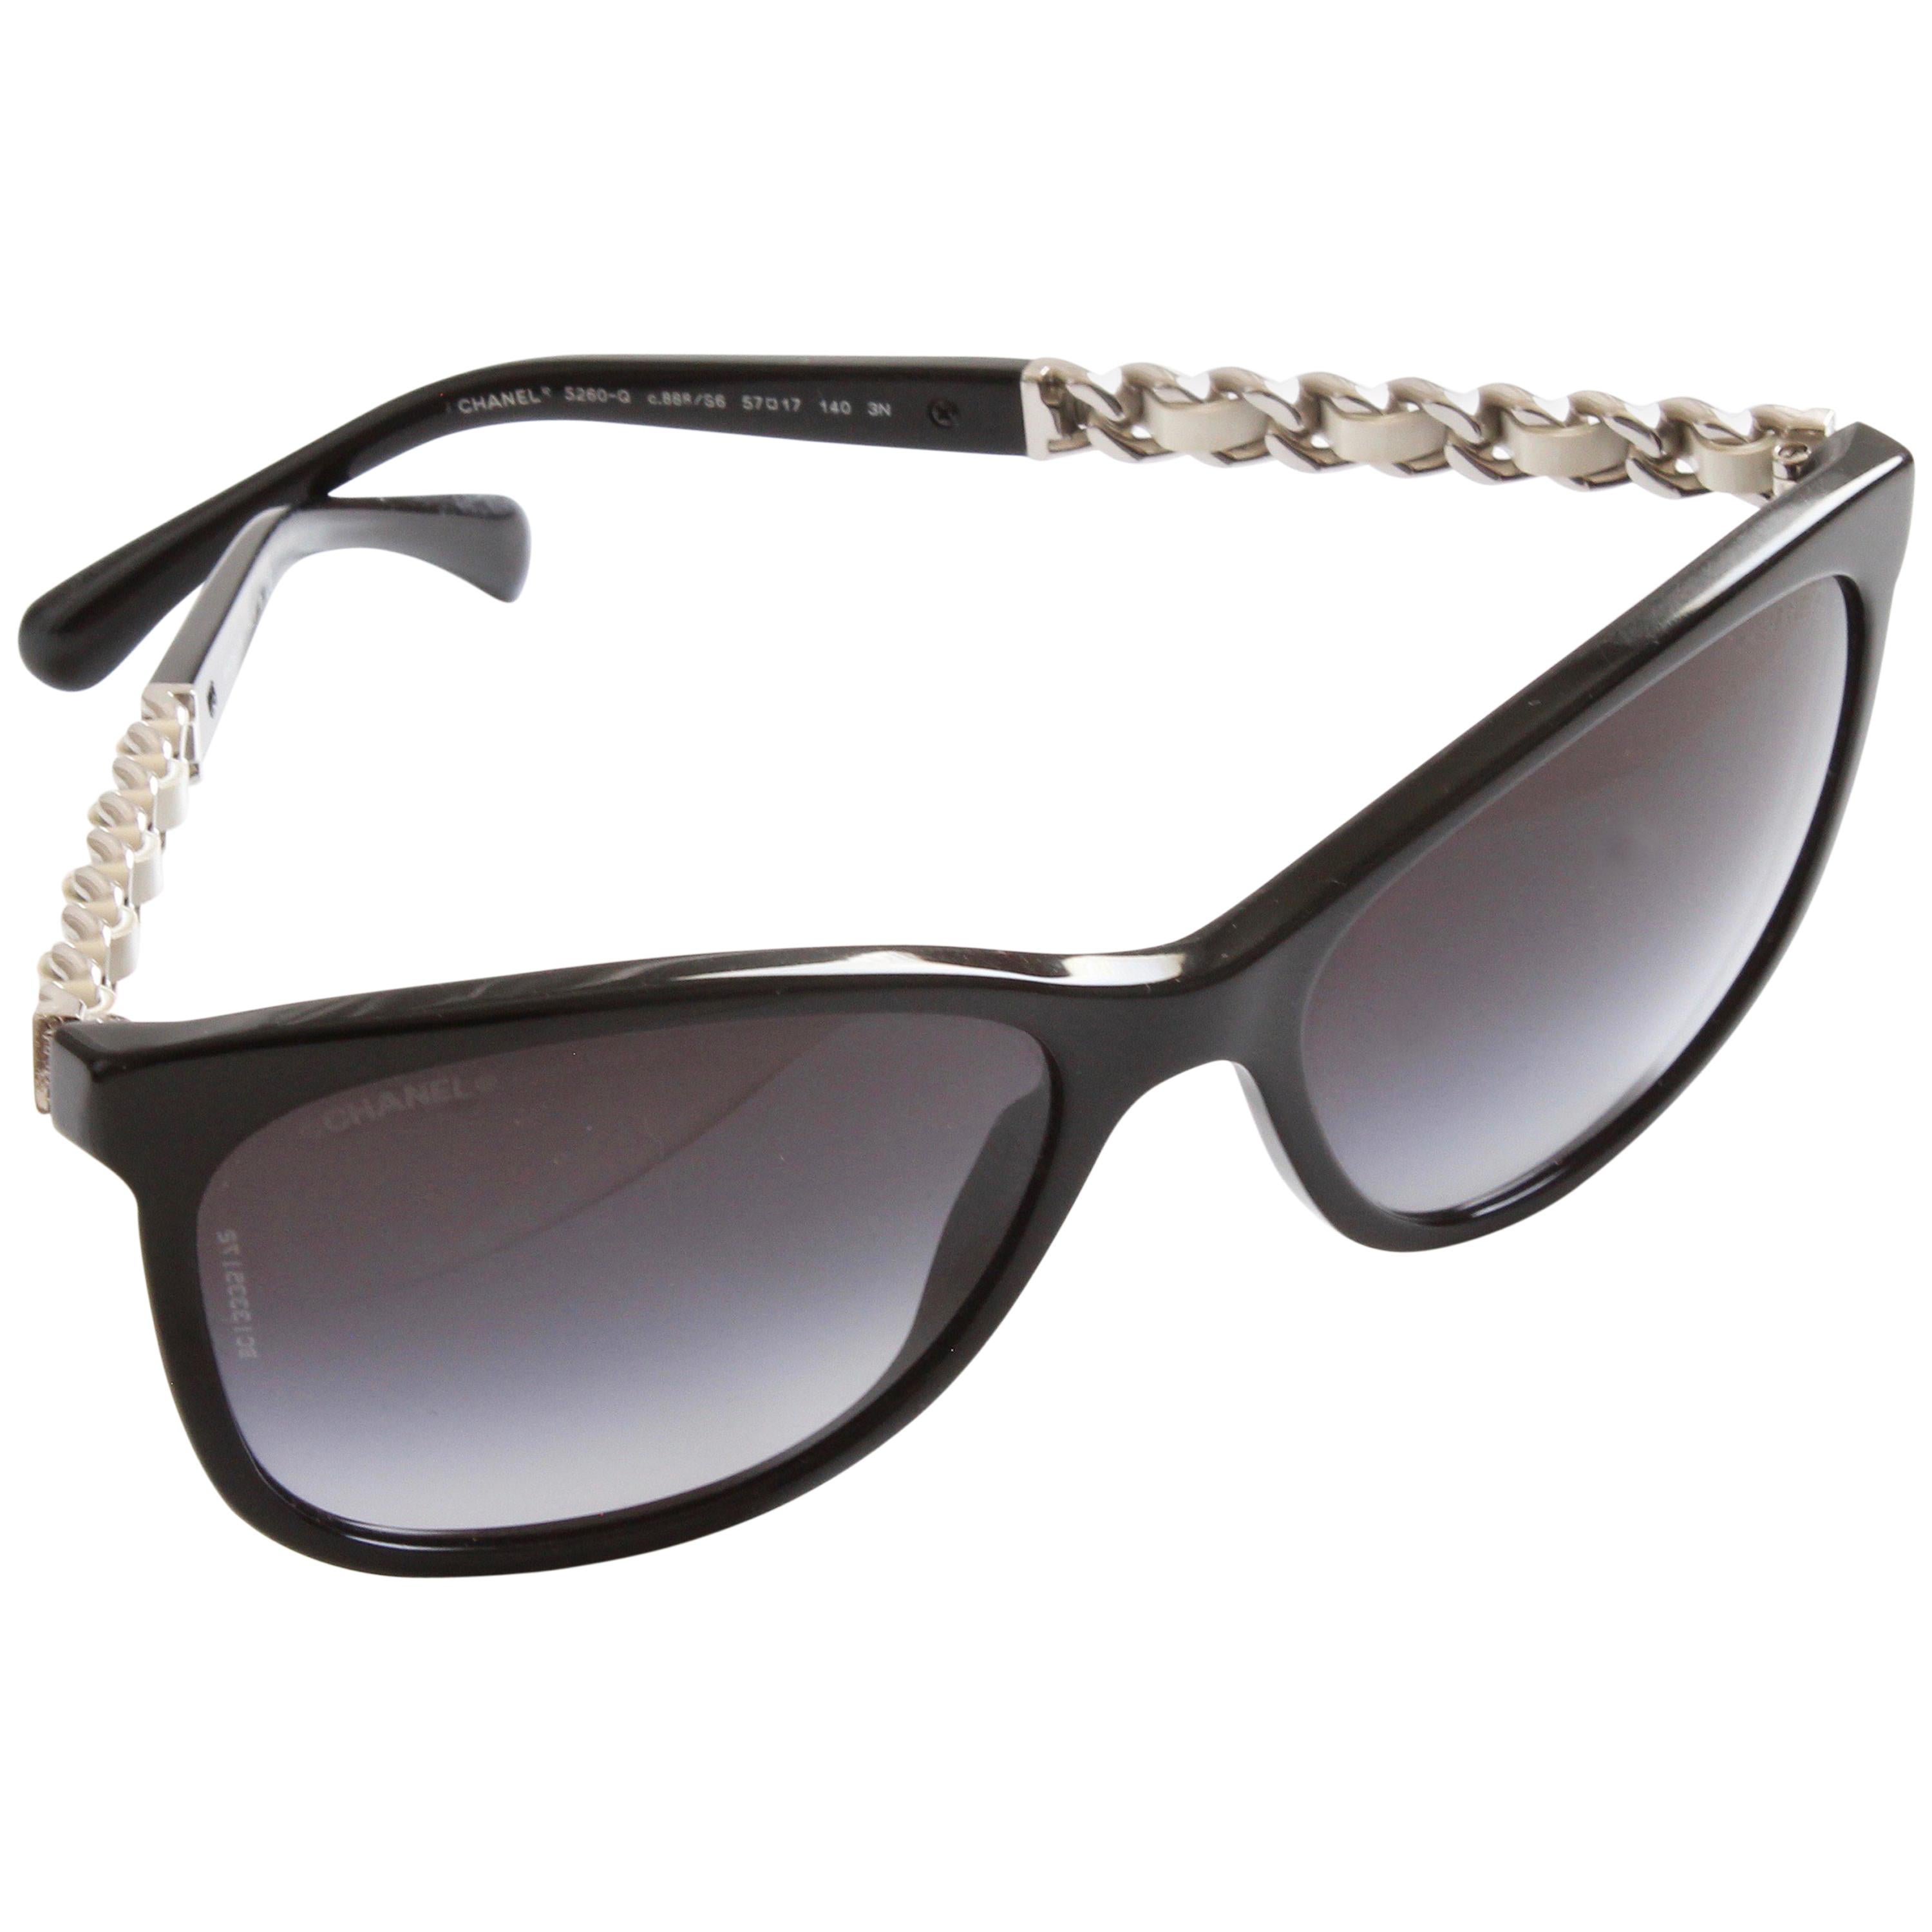 Auth ,Chanel new sunglasses black & silver 3 chains /pearl, leather  & silver